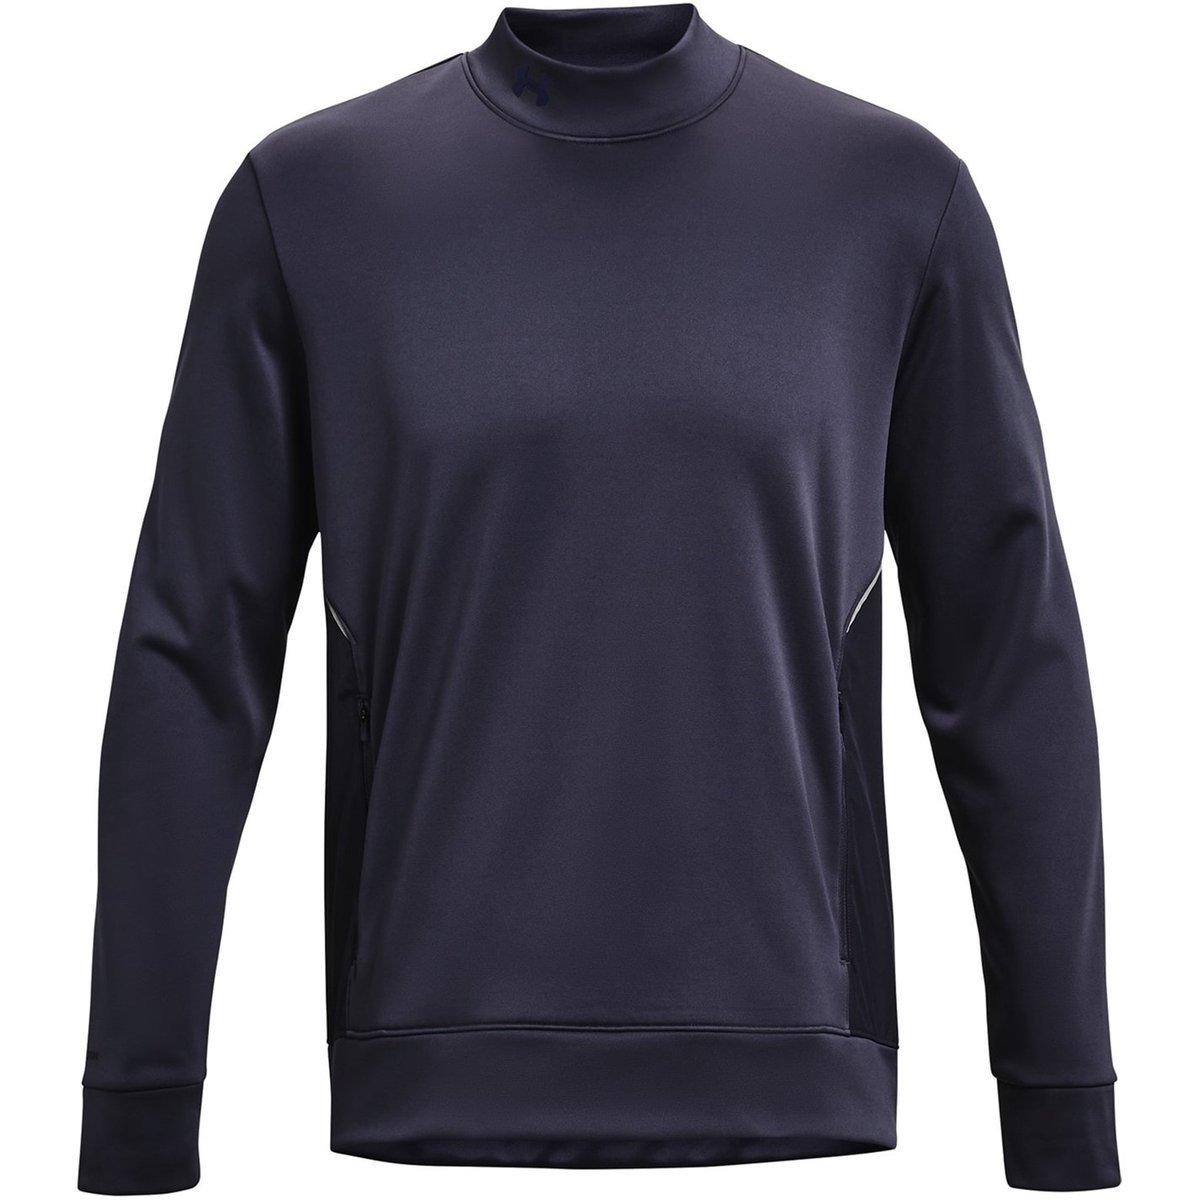 Under Armour Empowered Funnel Neck Long Sleeve Womens Running Top